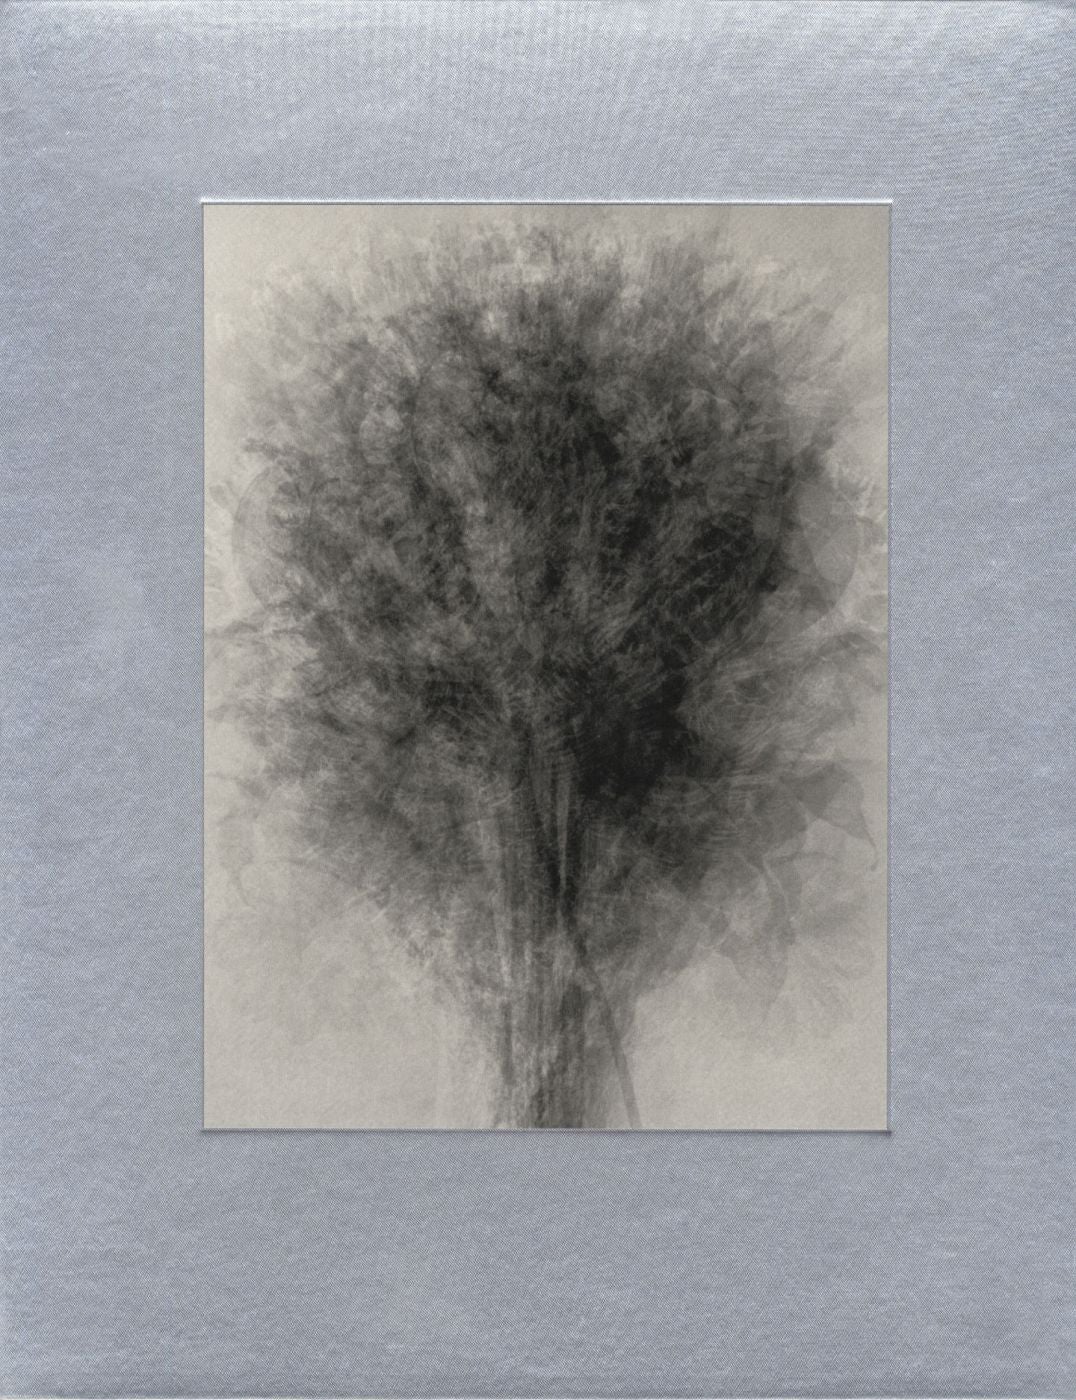 NZ Library #1: Idris Khan: Image | Music | Text, Limited Edition (NZ Library - Set One, Volume Four) [SIGNED]